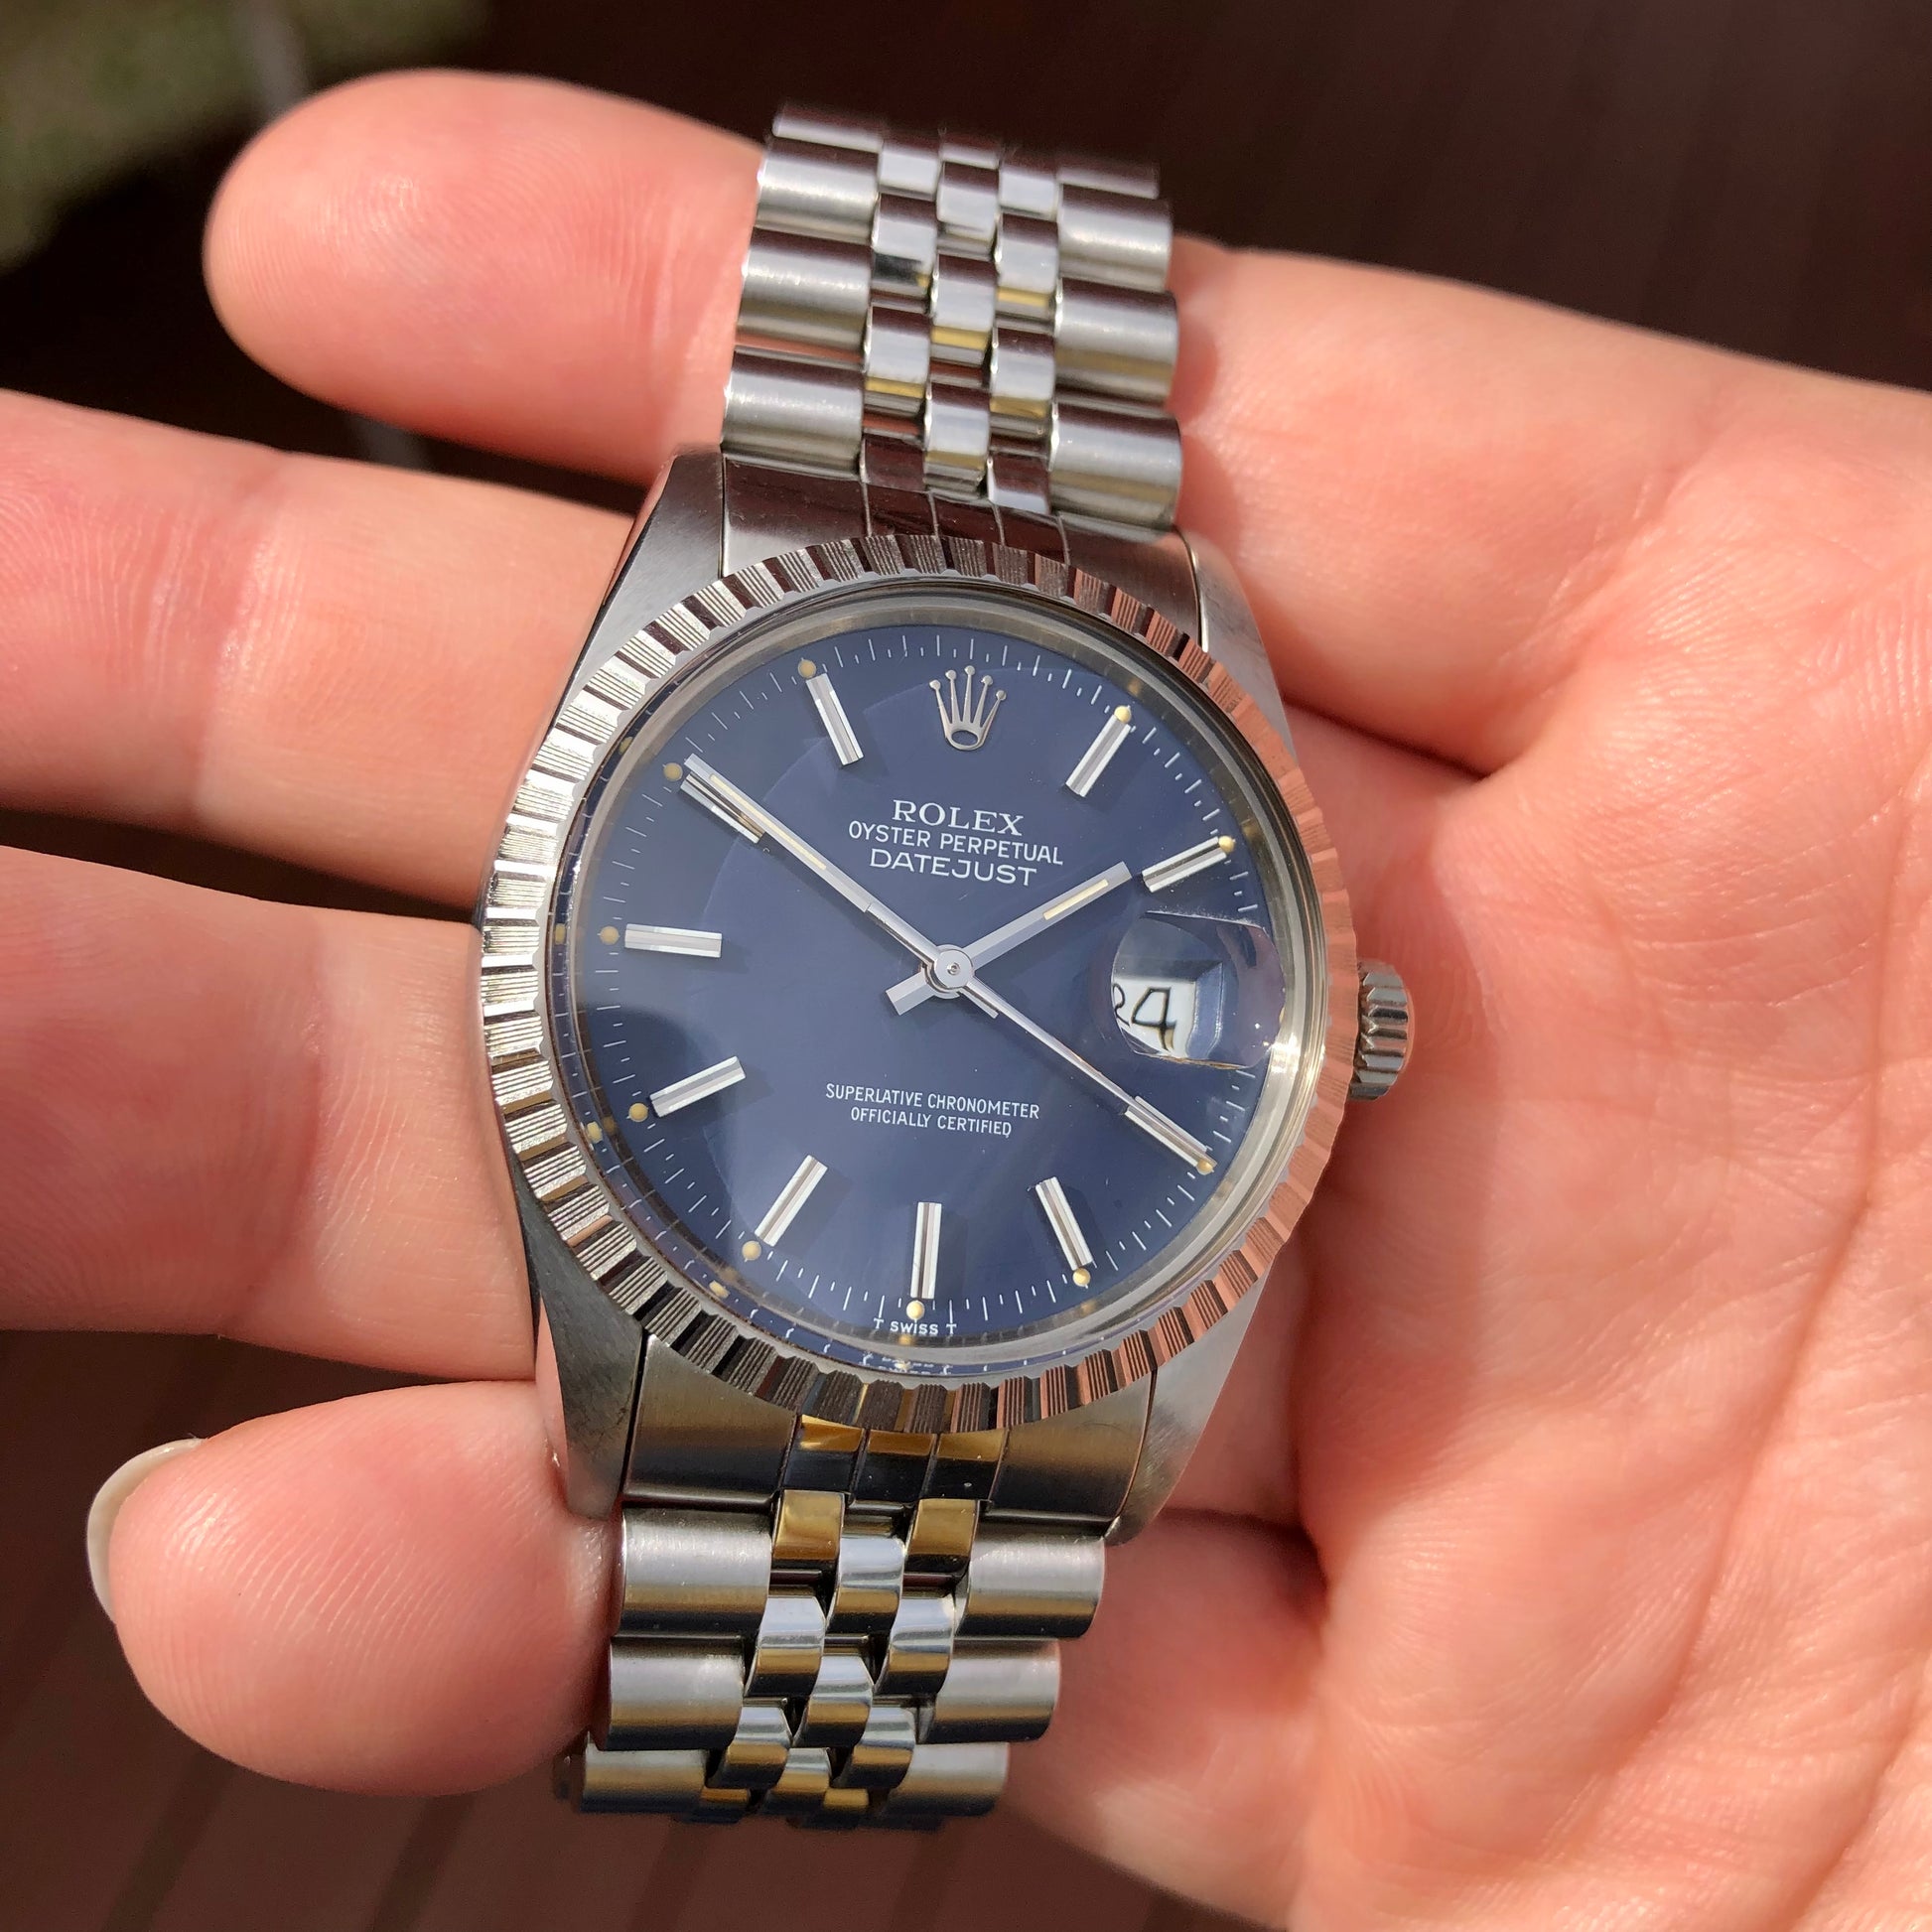 1985 Vintage Rolex Datejust 16030 Steel Blue Engine Turned Automatic Wristwatch - Hashtag Watch Company